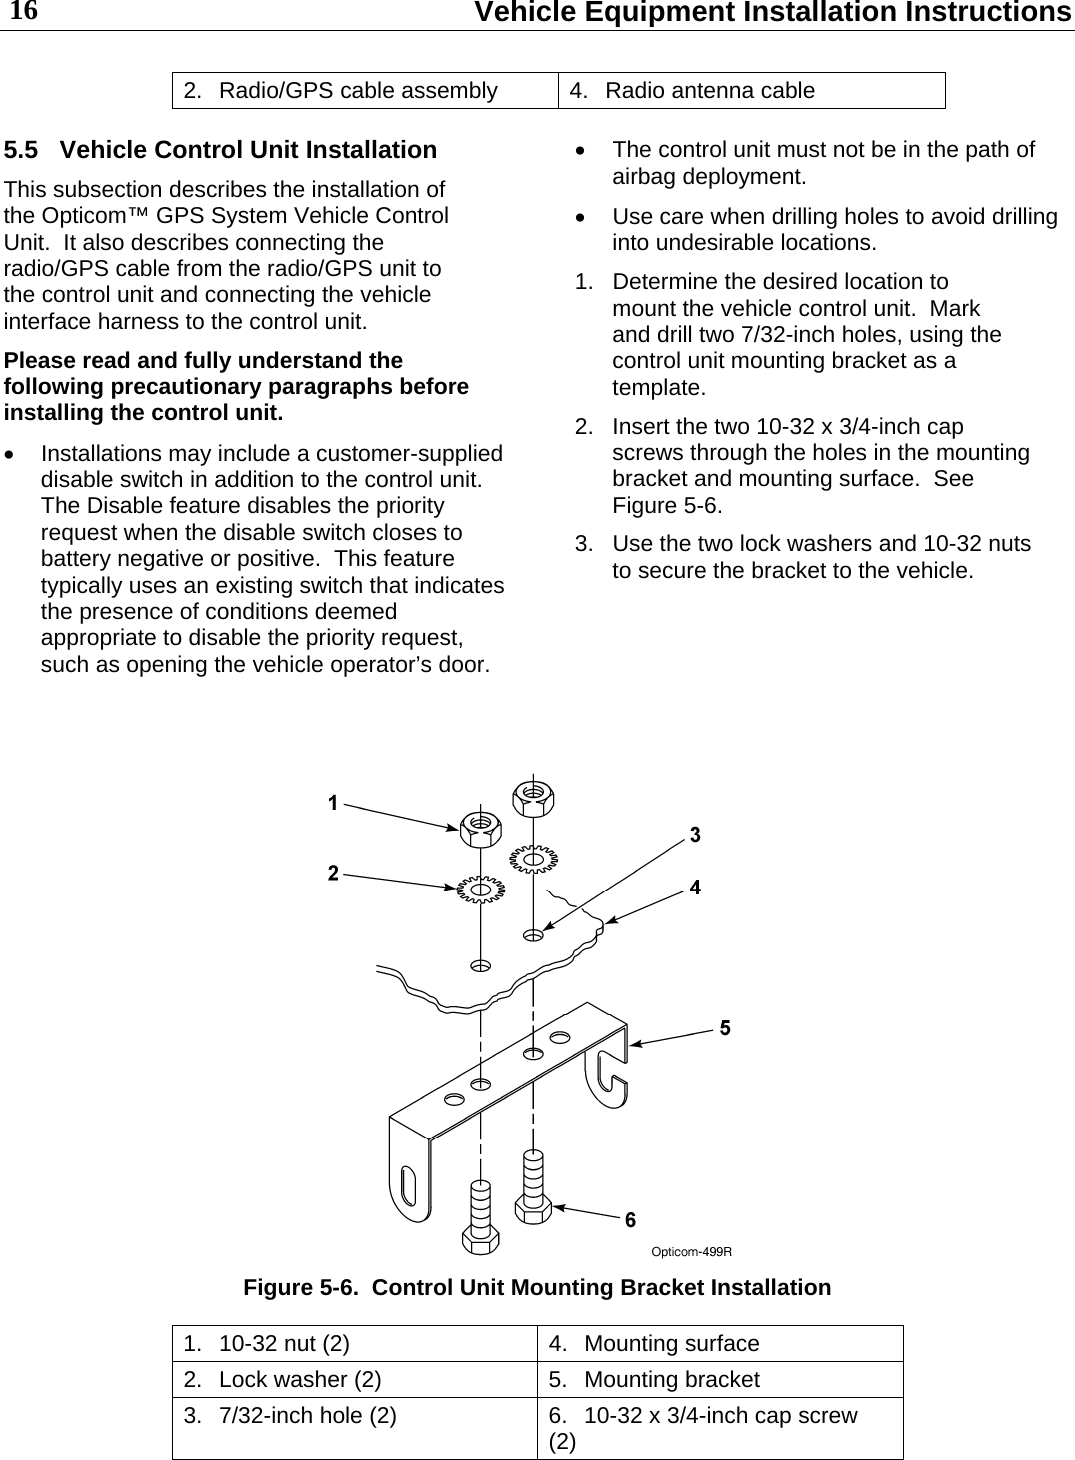  Vehicle Equipment Installation Instructions 16 2.  Radio/GPS cable assembly  4.  Radio antenna cable 5.5  Vehicle Control Unit Installation This subsection describes the installation of the Opticom™ GPS System Vehicle Control Unit.  It also describes connecting the radio/GPS cable from the radio/GPS unit to the control unit and connecting the vehicle interface harness to the control unit. Please read and fully understand the following precautionary paragraphs before installing the control unit.   Installations may include a customer-supplied disable switch in addition to the control unit.  The Disable feature disables the priority request when the disable switch closes to battery negative or positive.  This feature typically uses an existing switch that indicates the presence of conditions deemed appropriate to disable the priority request, such as opening the vehicle operator’s door.   The control unit must not be in the path of airbag deployment.   Use care when drilling holes to avoid drilling into undesirable locations. 1.  Determine the desired location to mount the vehicle control unit.  Mark and drill two 7/32-inch holes, using the control unit mounting bracket as a template. 2.  Insert the two 10-32 x 3/4-inch cap screws through the holes in the mounting bracket and mounting surface.  See Figure 5-6. 3.  Use the two lock washers and 10-32 nuts to secure the bracket to the vehicle.     Figure 5-6.  Control Unit Mounting Bracket Installation 1.  10-32 nut (2)  4.  Mounting surface 2.  Lock washer (2)  5.  Mounting bracket 3.  7/32-inch hole (2)  6.  10-32 x 3/4-inch cap screw (2) 